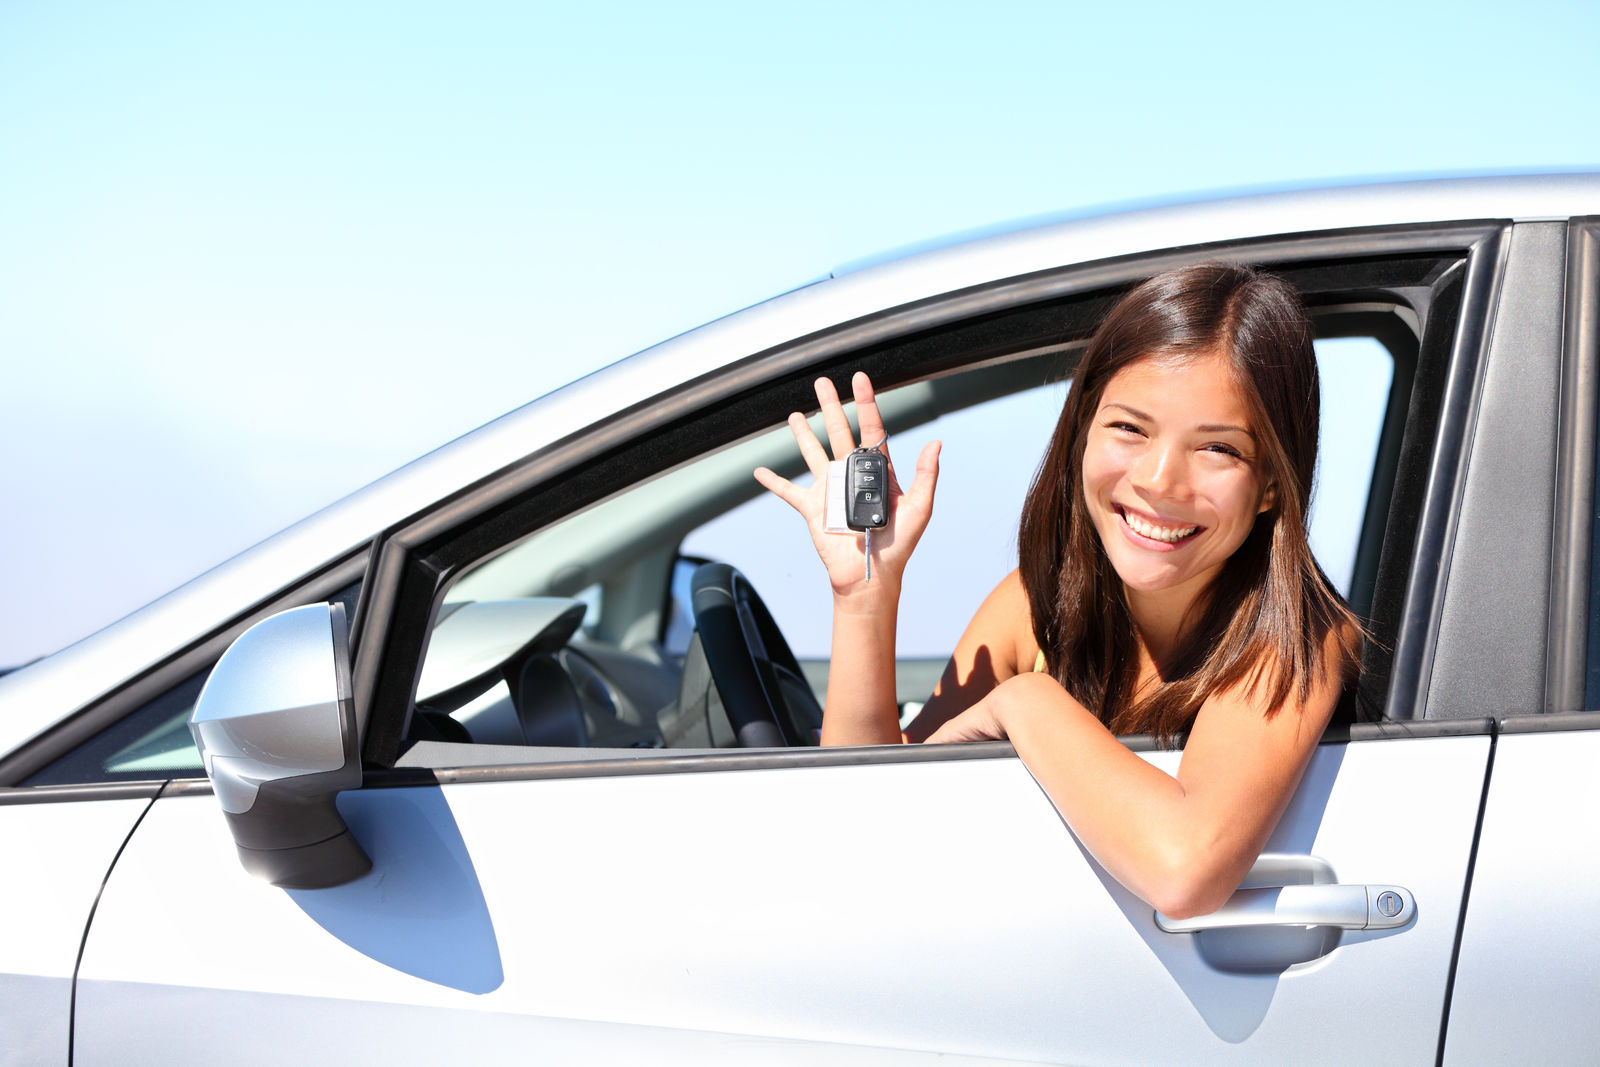 Car Accident Insurance Statistics for Teens